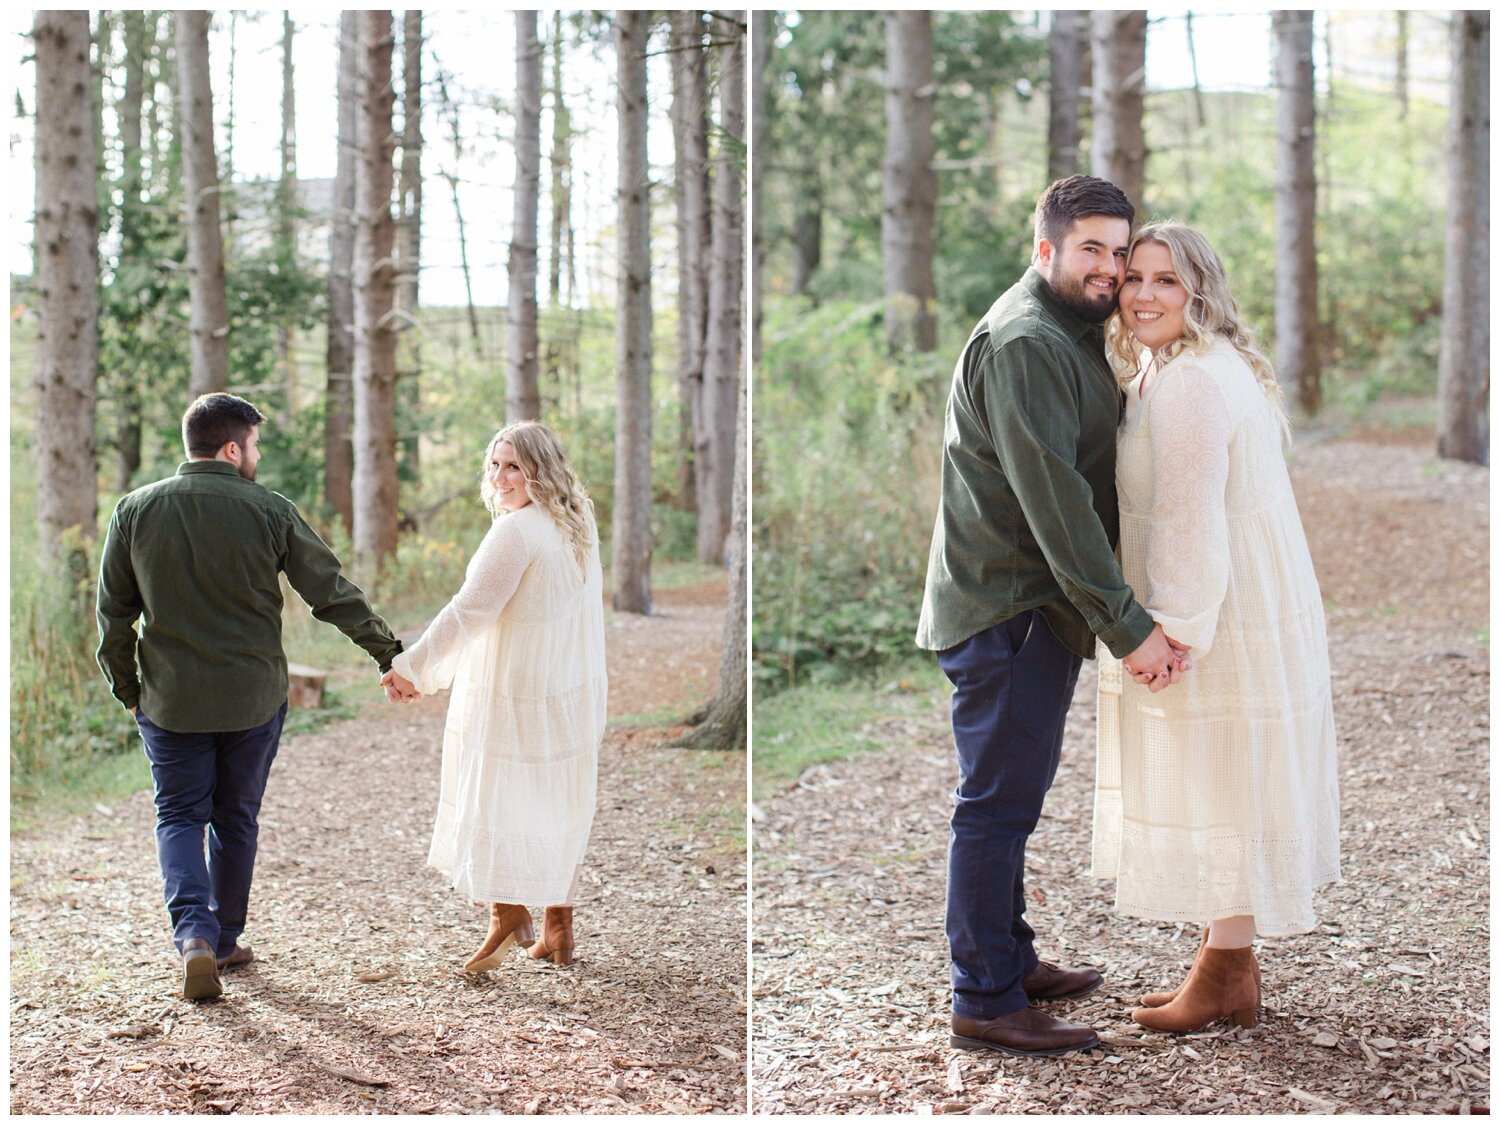 Clarks Summit PA Fall Engagement Session_0001.jpg